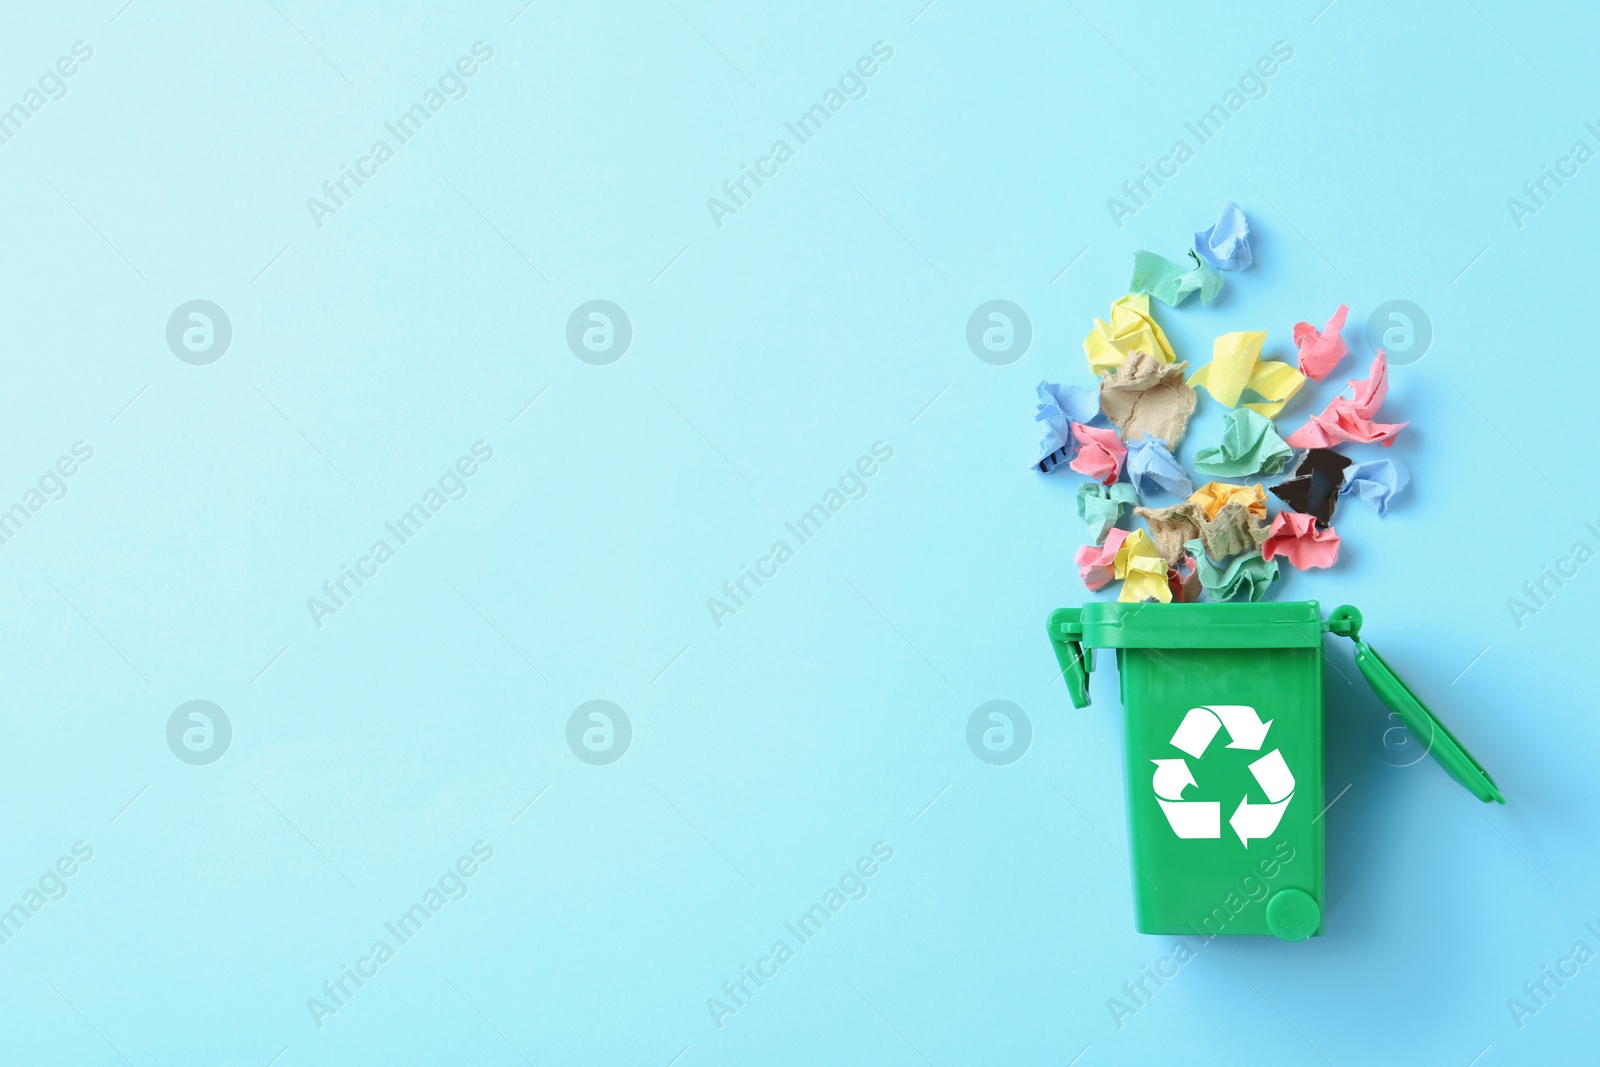 Photo of Trash bin and different garbage on color background, top view with space for text. Waste recycling concept